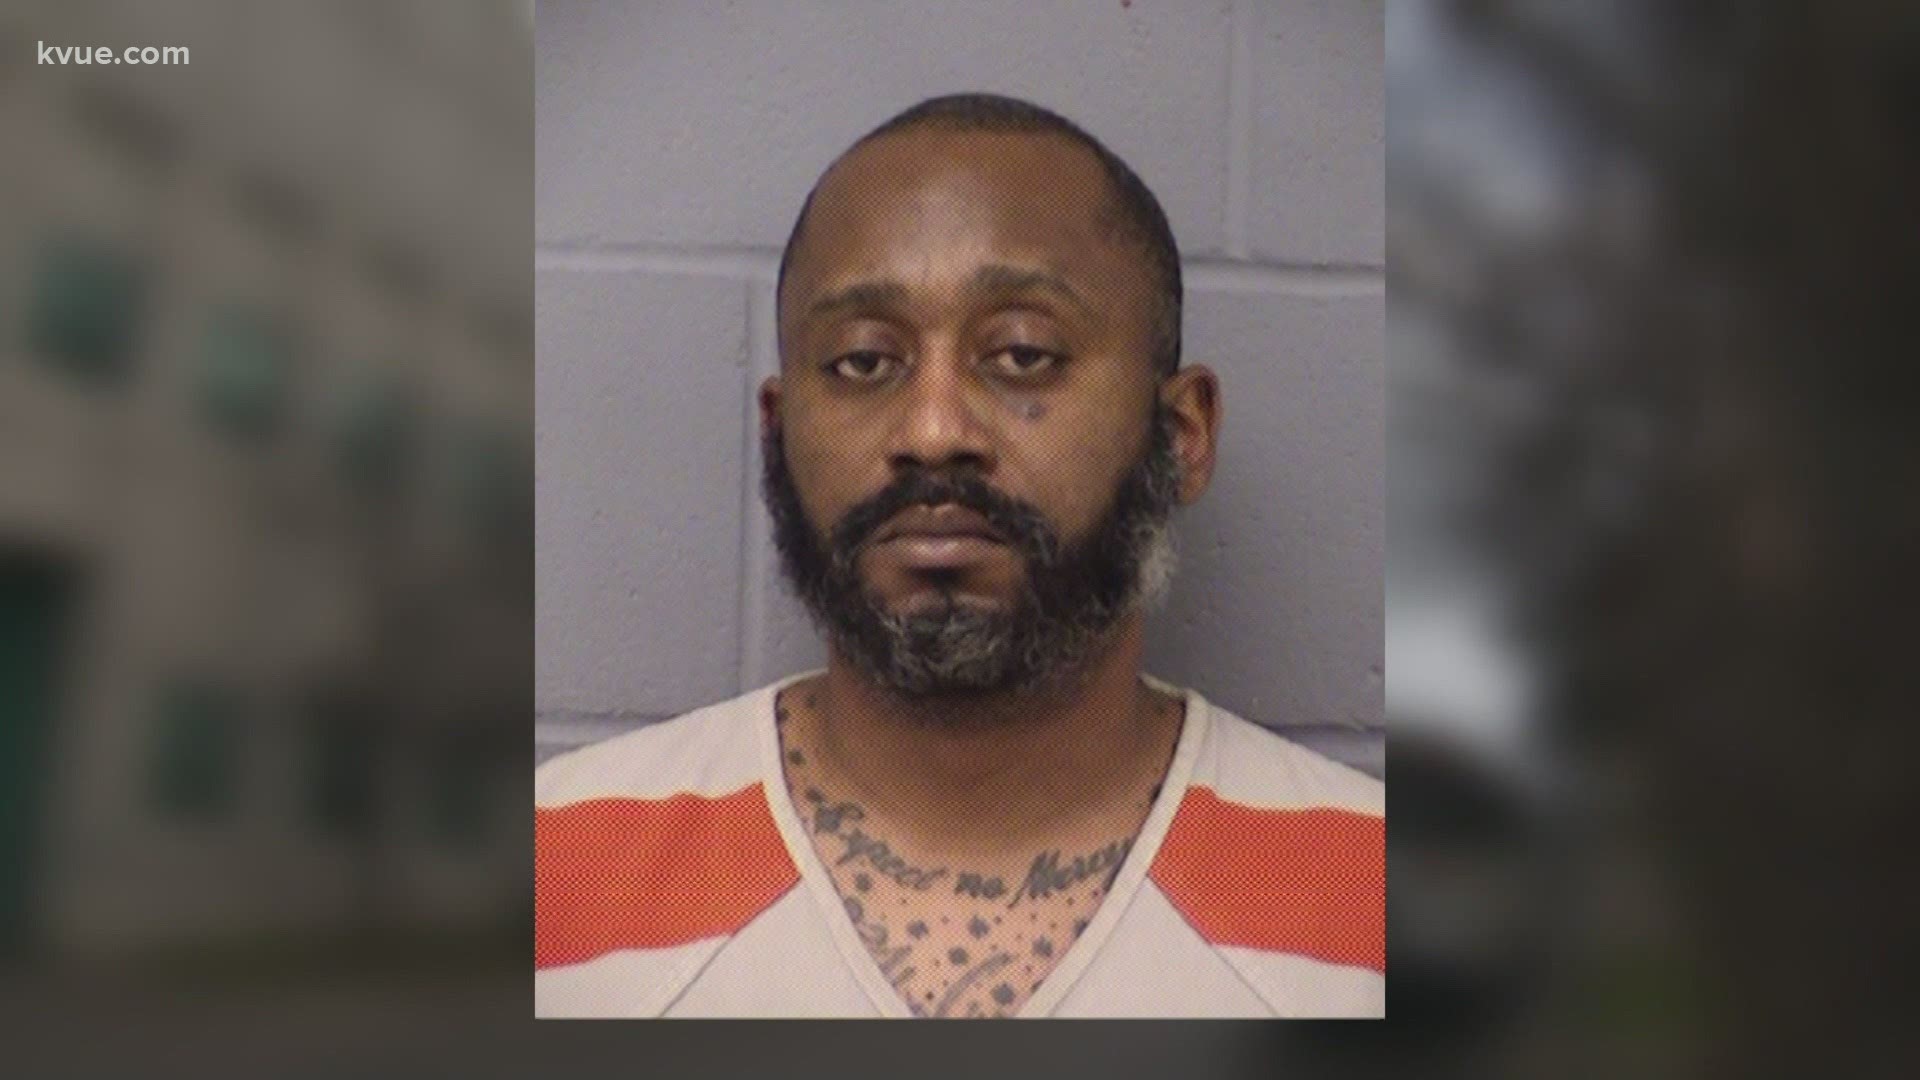 Stephen Broderick is charged with capital murder in connection to the deadly shooting near the Arboretum in northwest Austin on April 18.